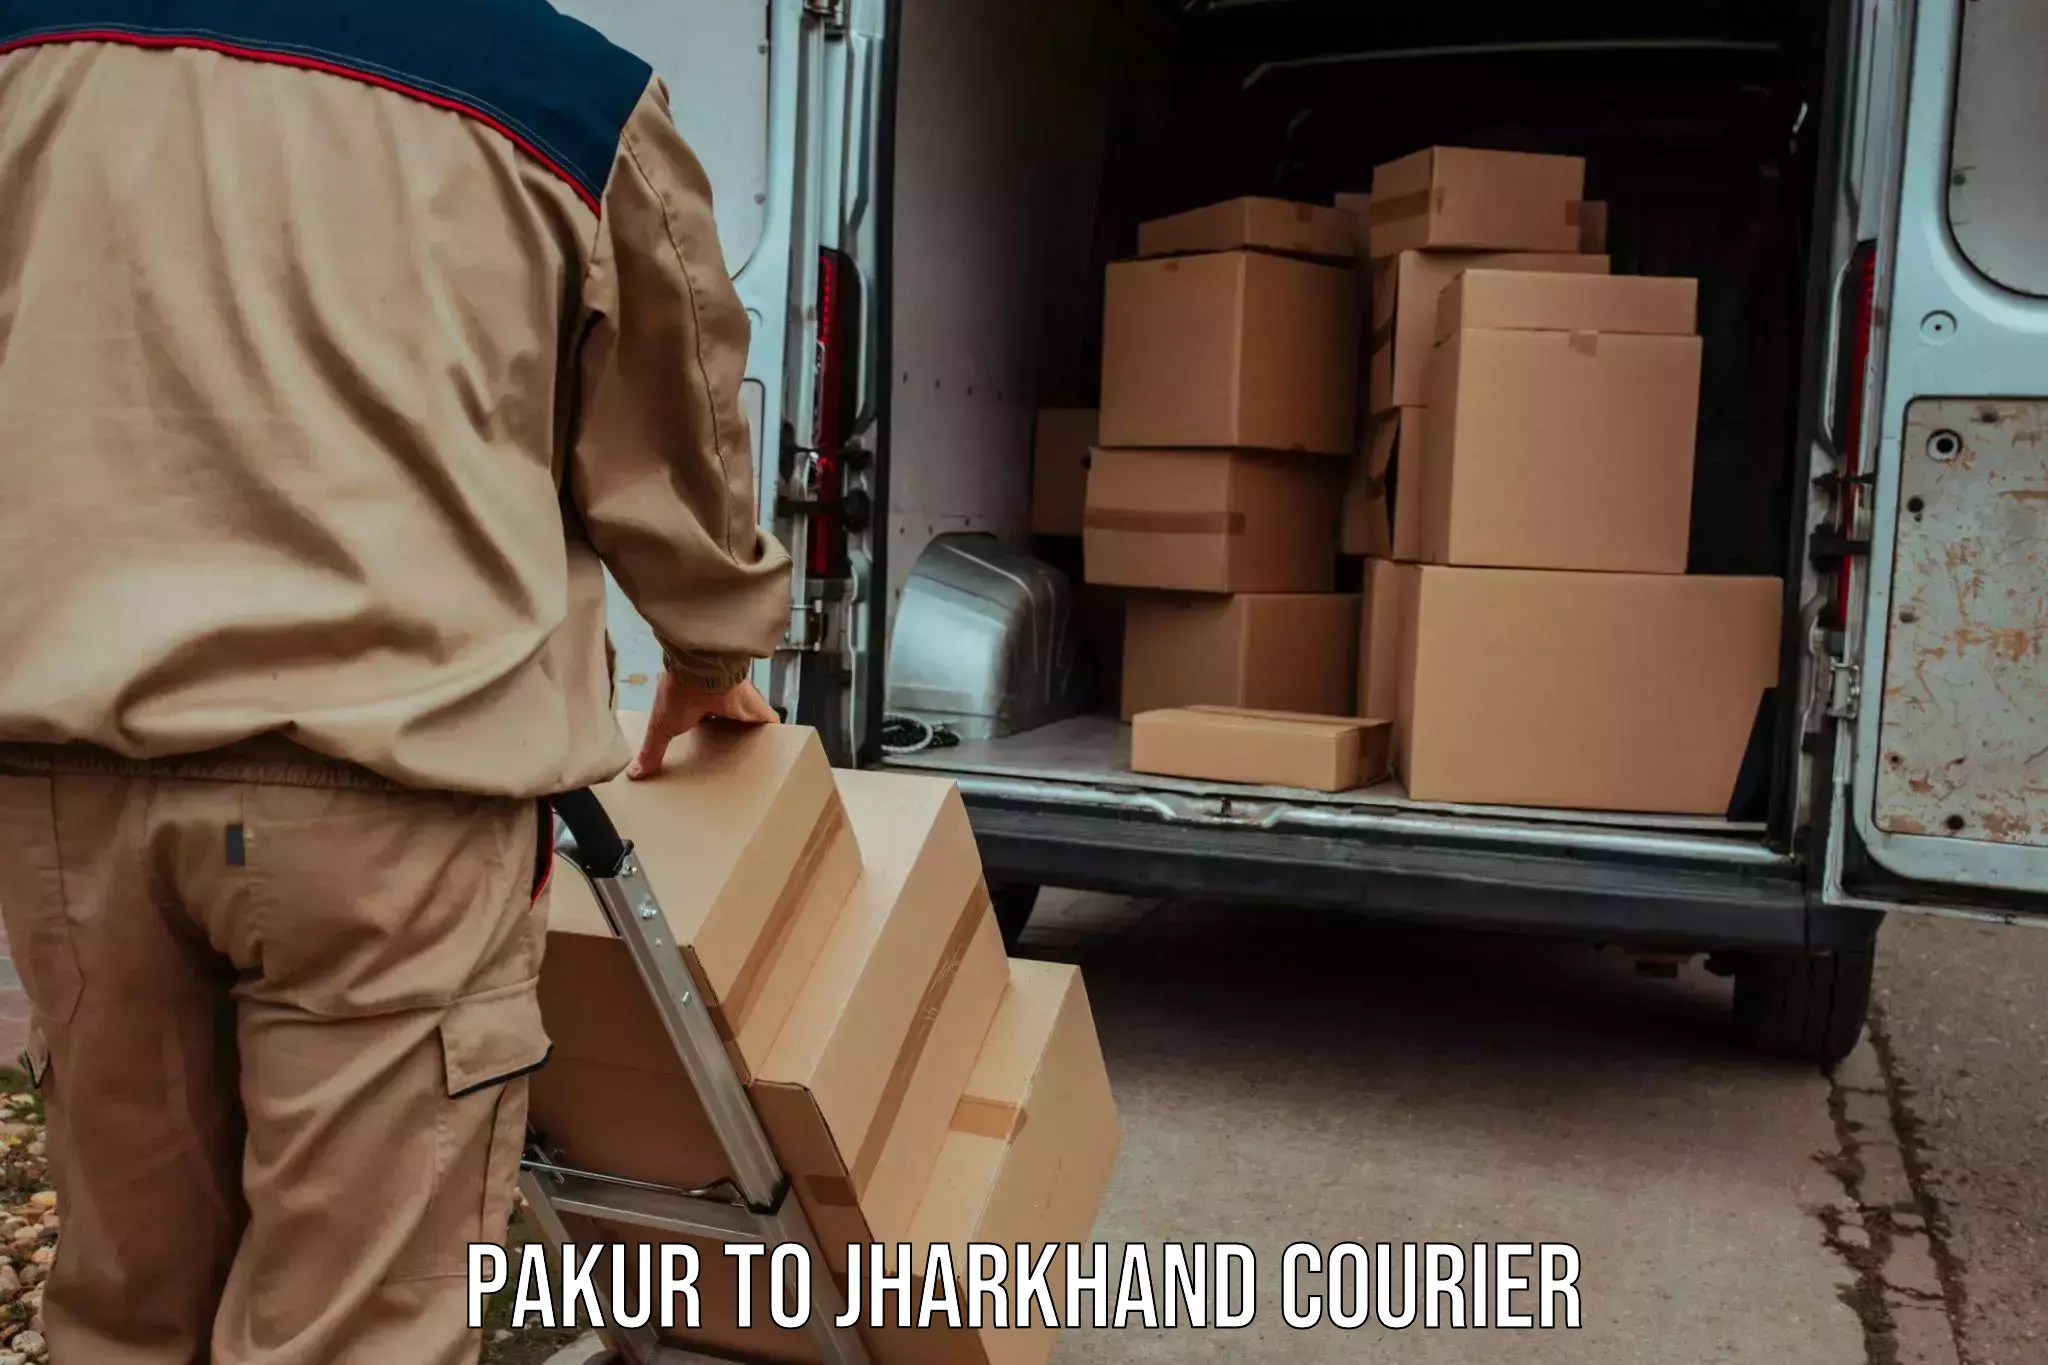 Next-day delivery options Pakur to Ramgarh